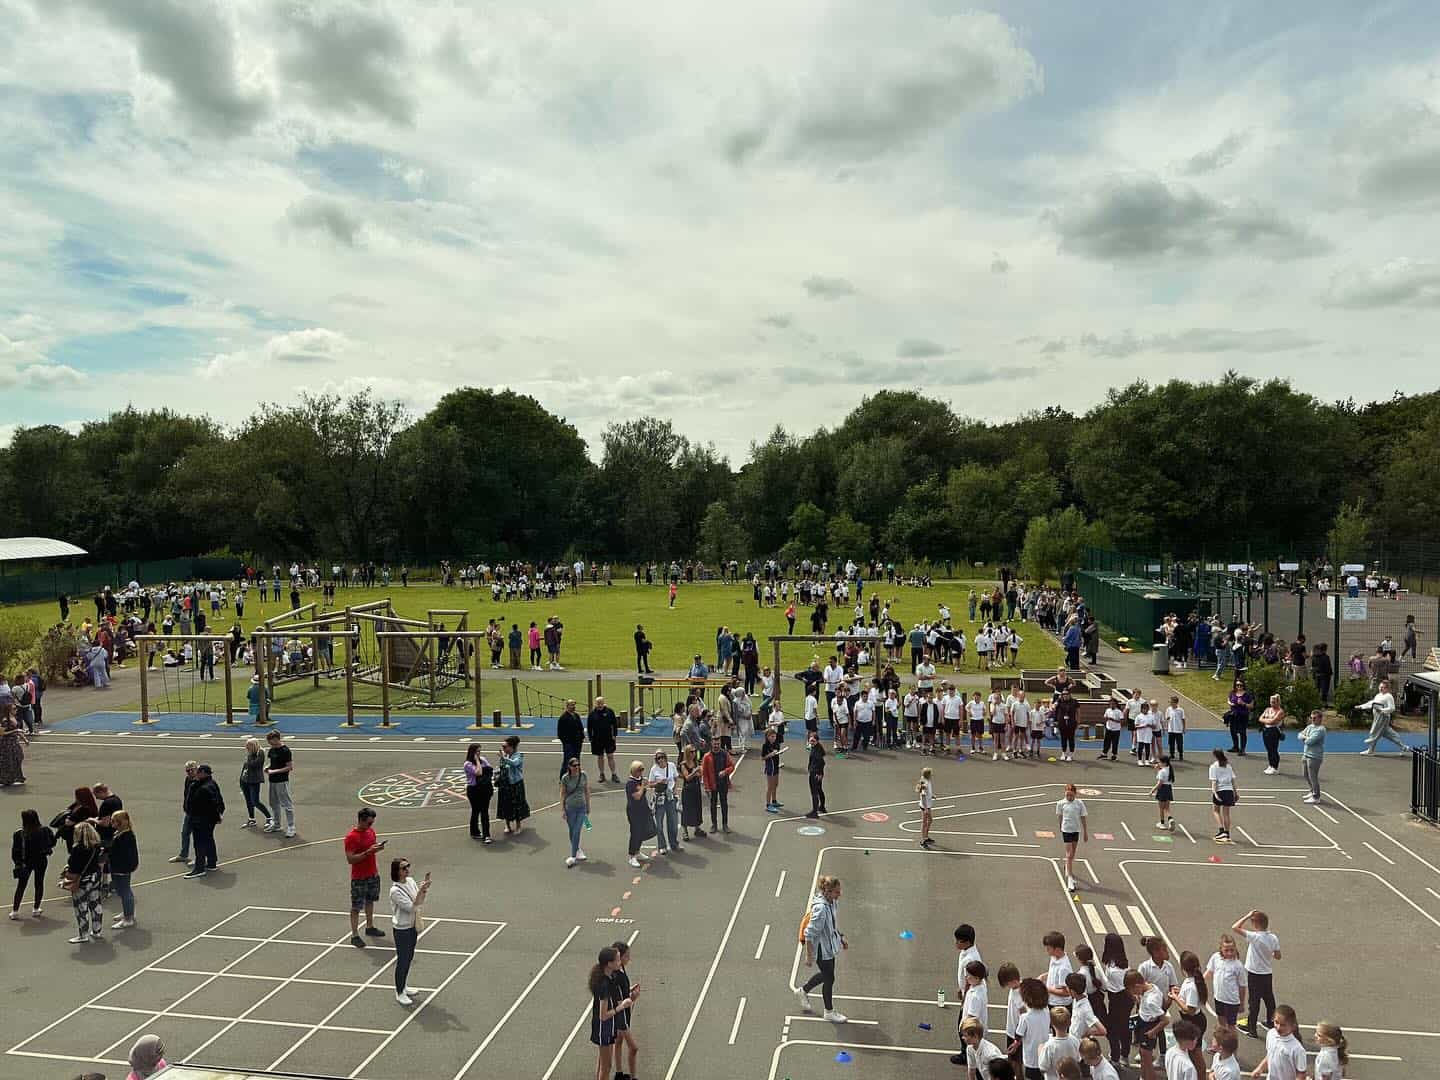 Arial image of sports day